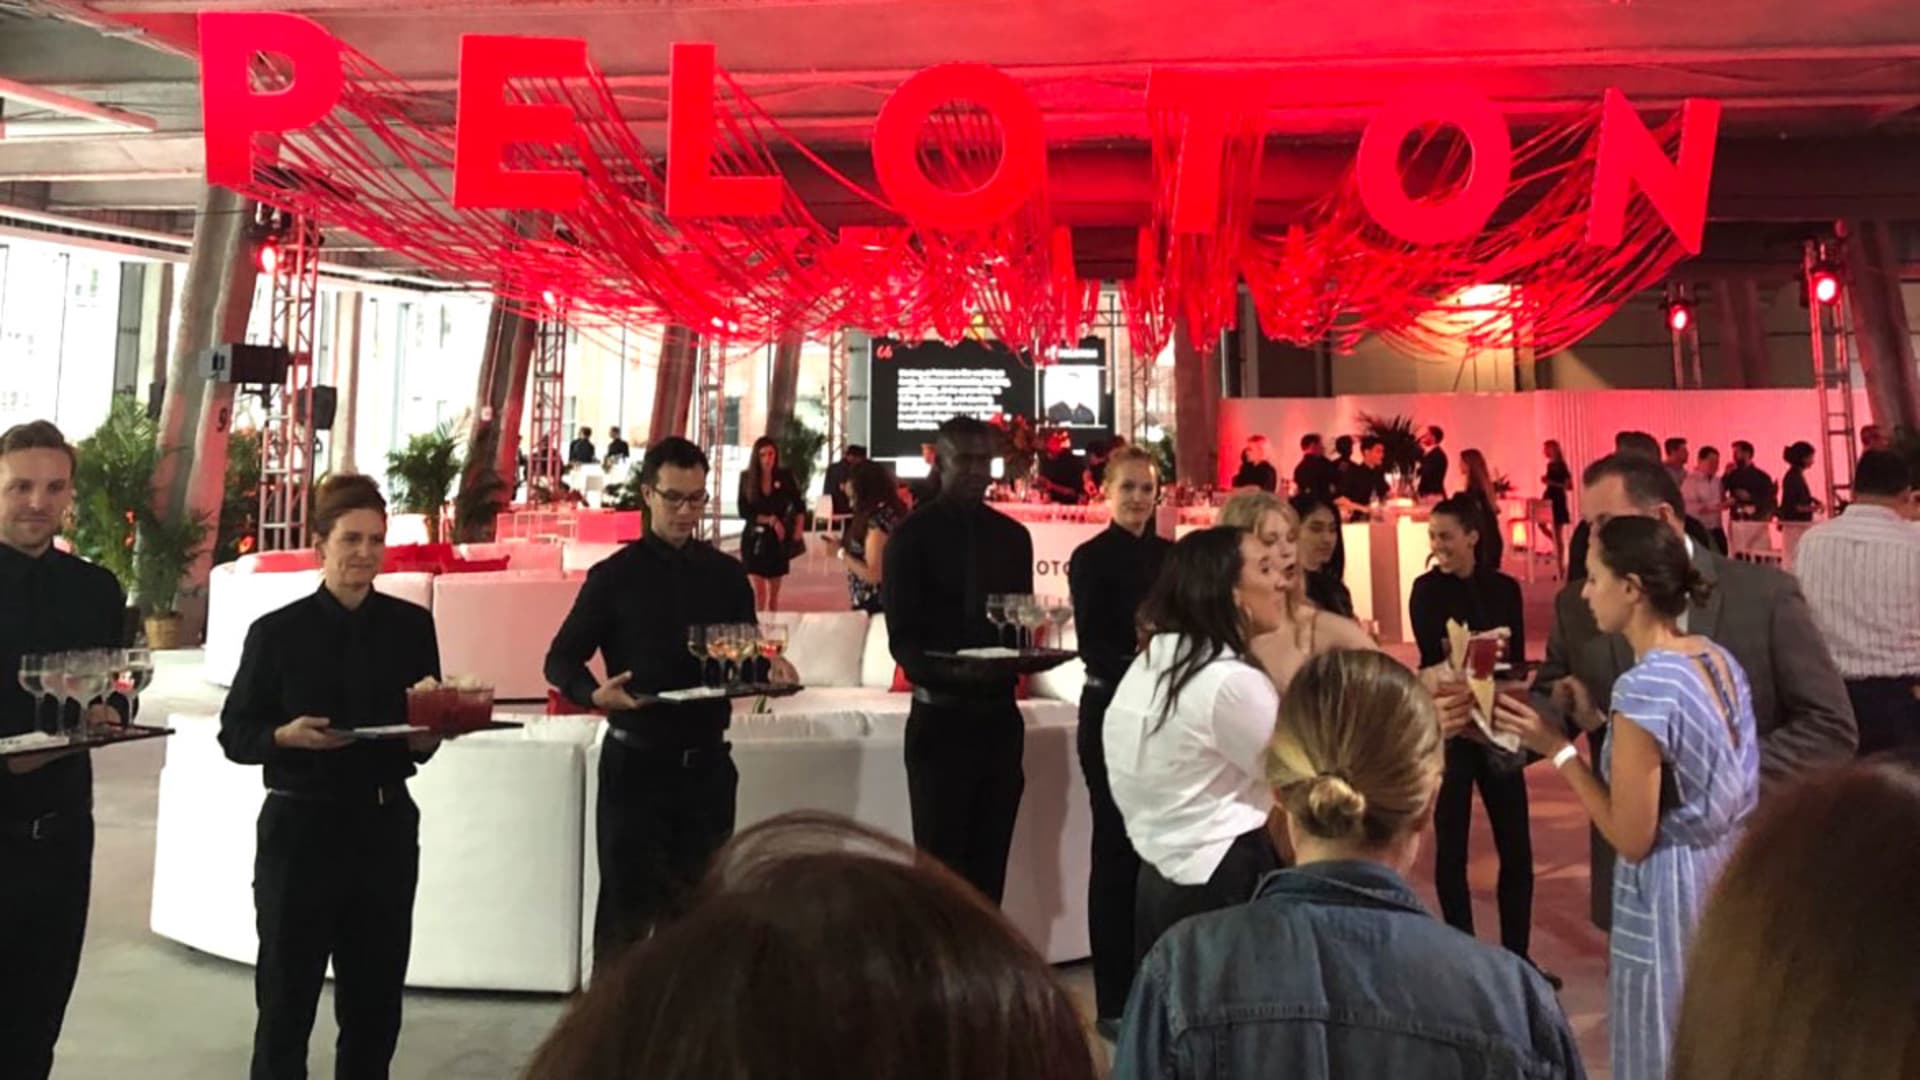 Peloton's IPO party at Hudson Yards the night they went public, Sept. 26, 2019.